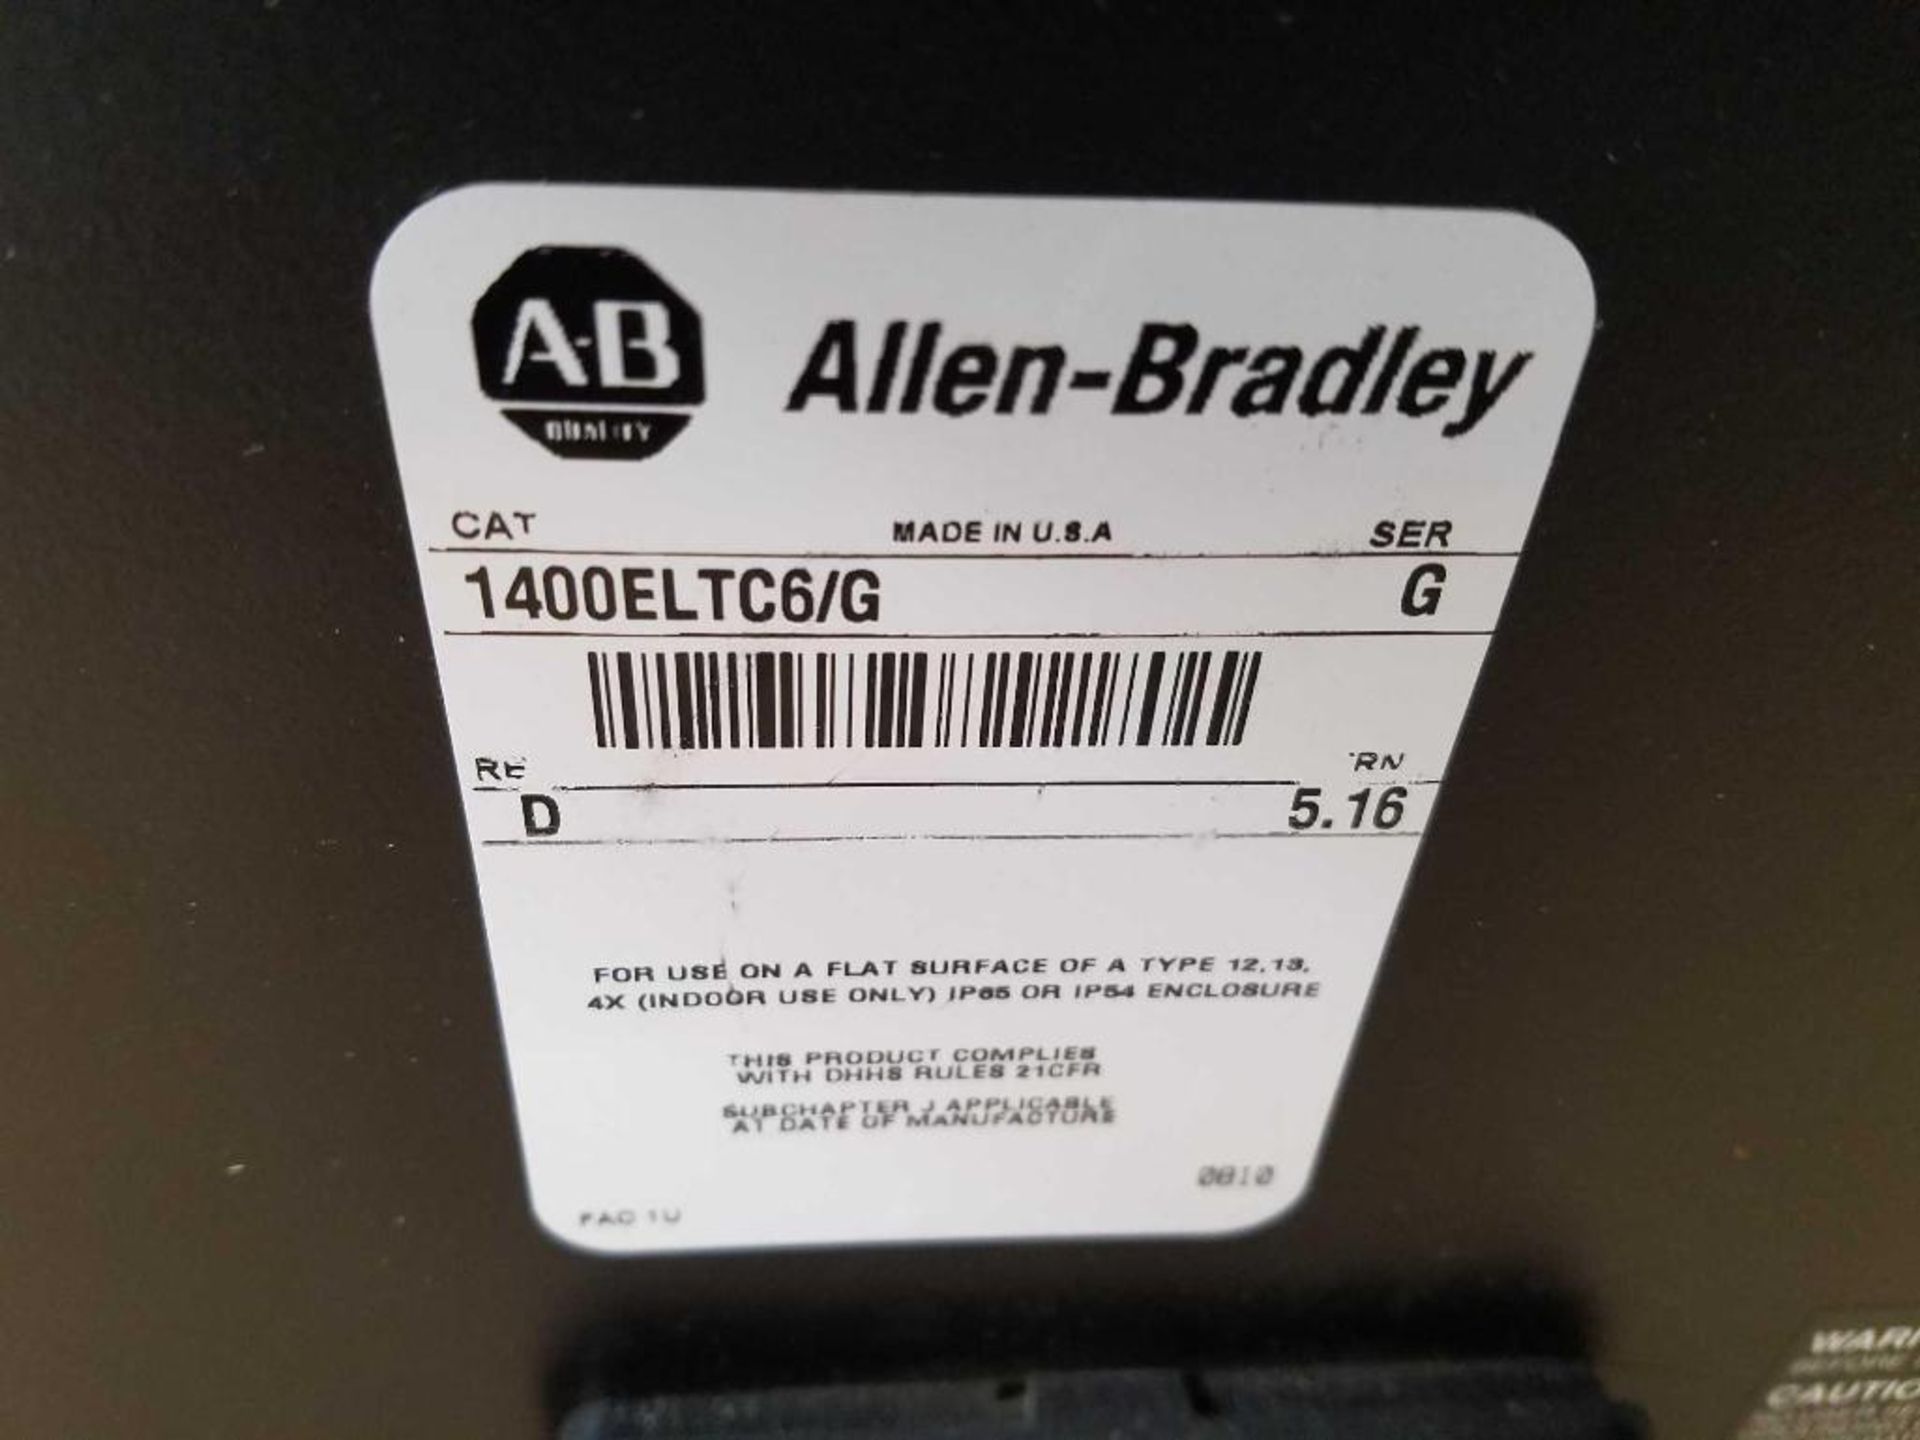 LOT OF 2 ALLEN BRADLEY 1400ELTC6 /G PanelView 1400e OPERATOR TERMINAL TOUCH SCREEN - Image 3 of 3